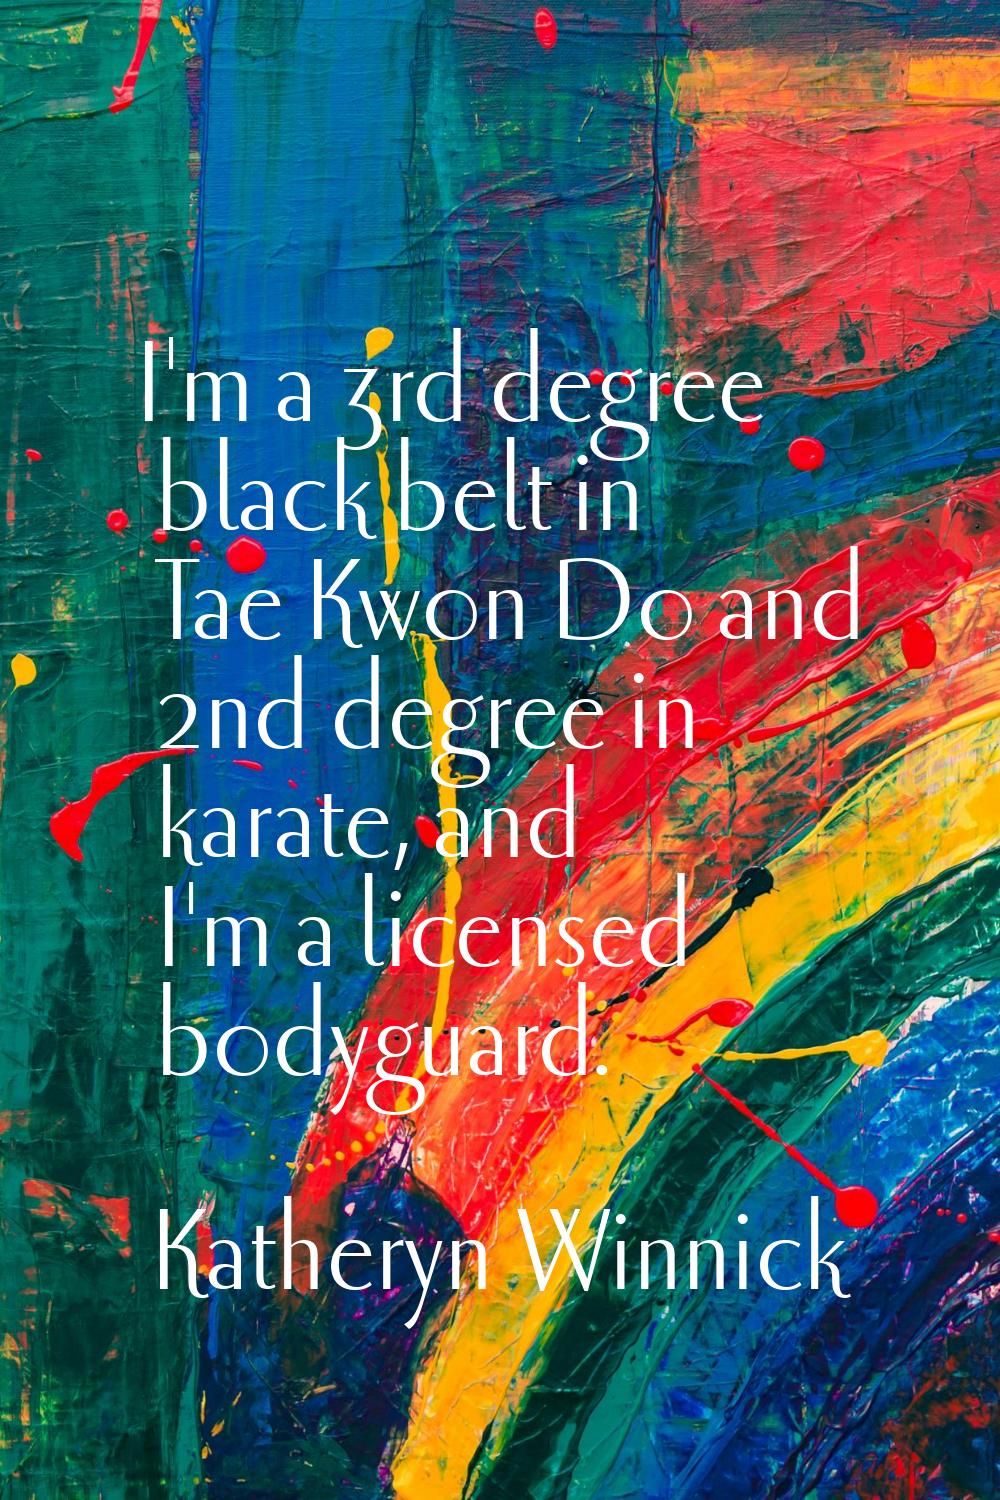 I'm a 3rd degree black belt in Tae Kwon Do and 2nd degree in karate, and I'm a licensed bodyguard.